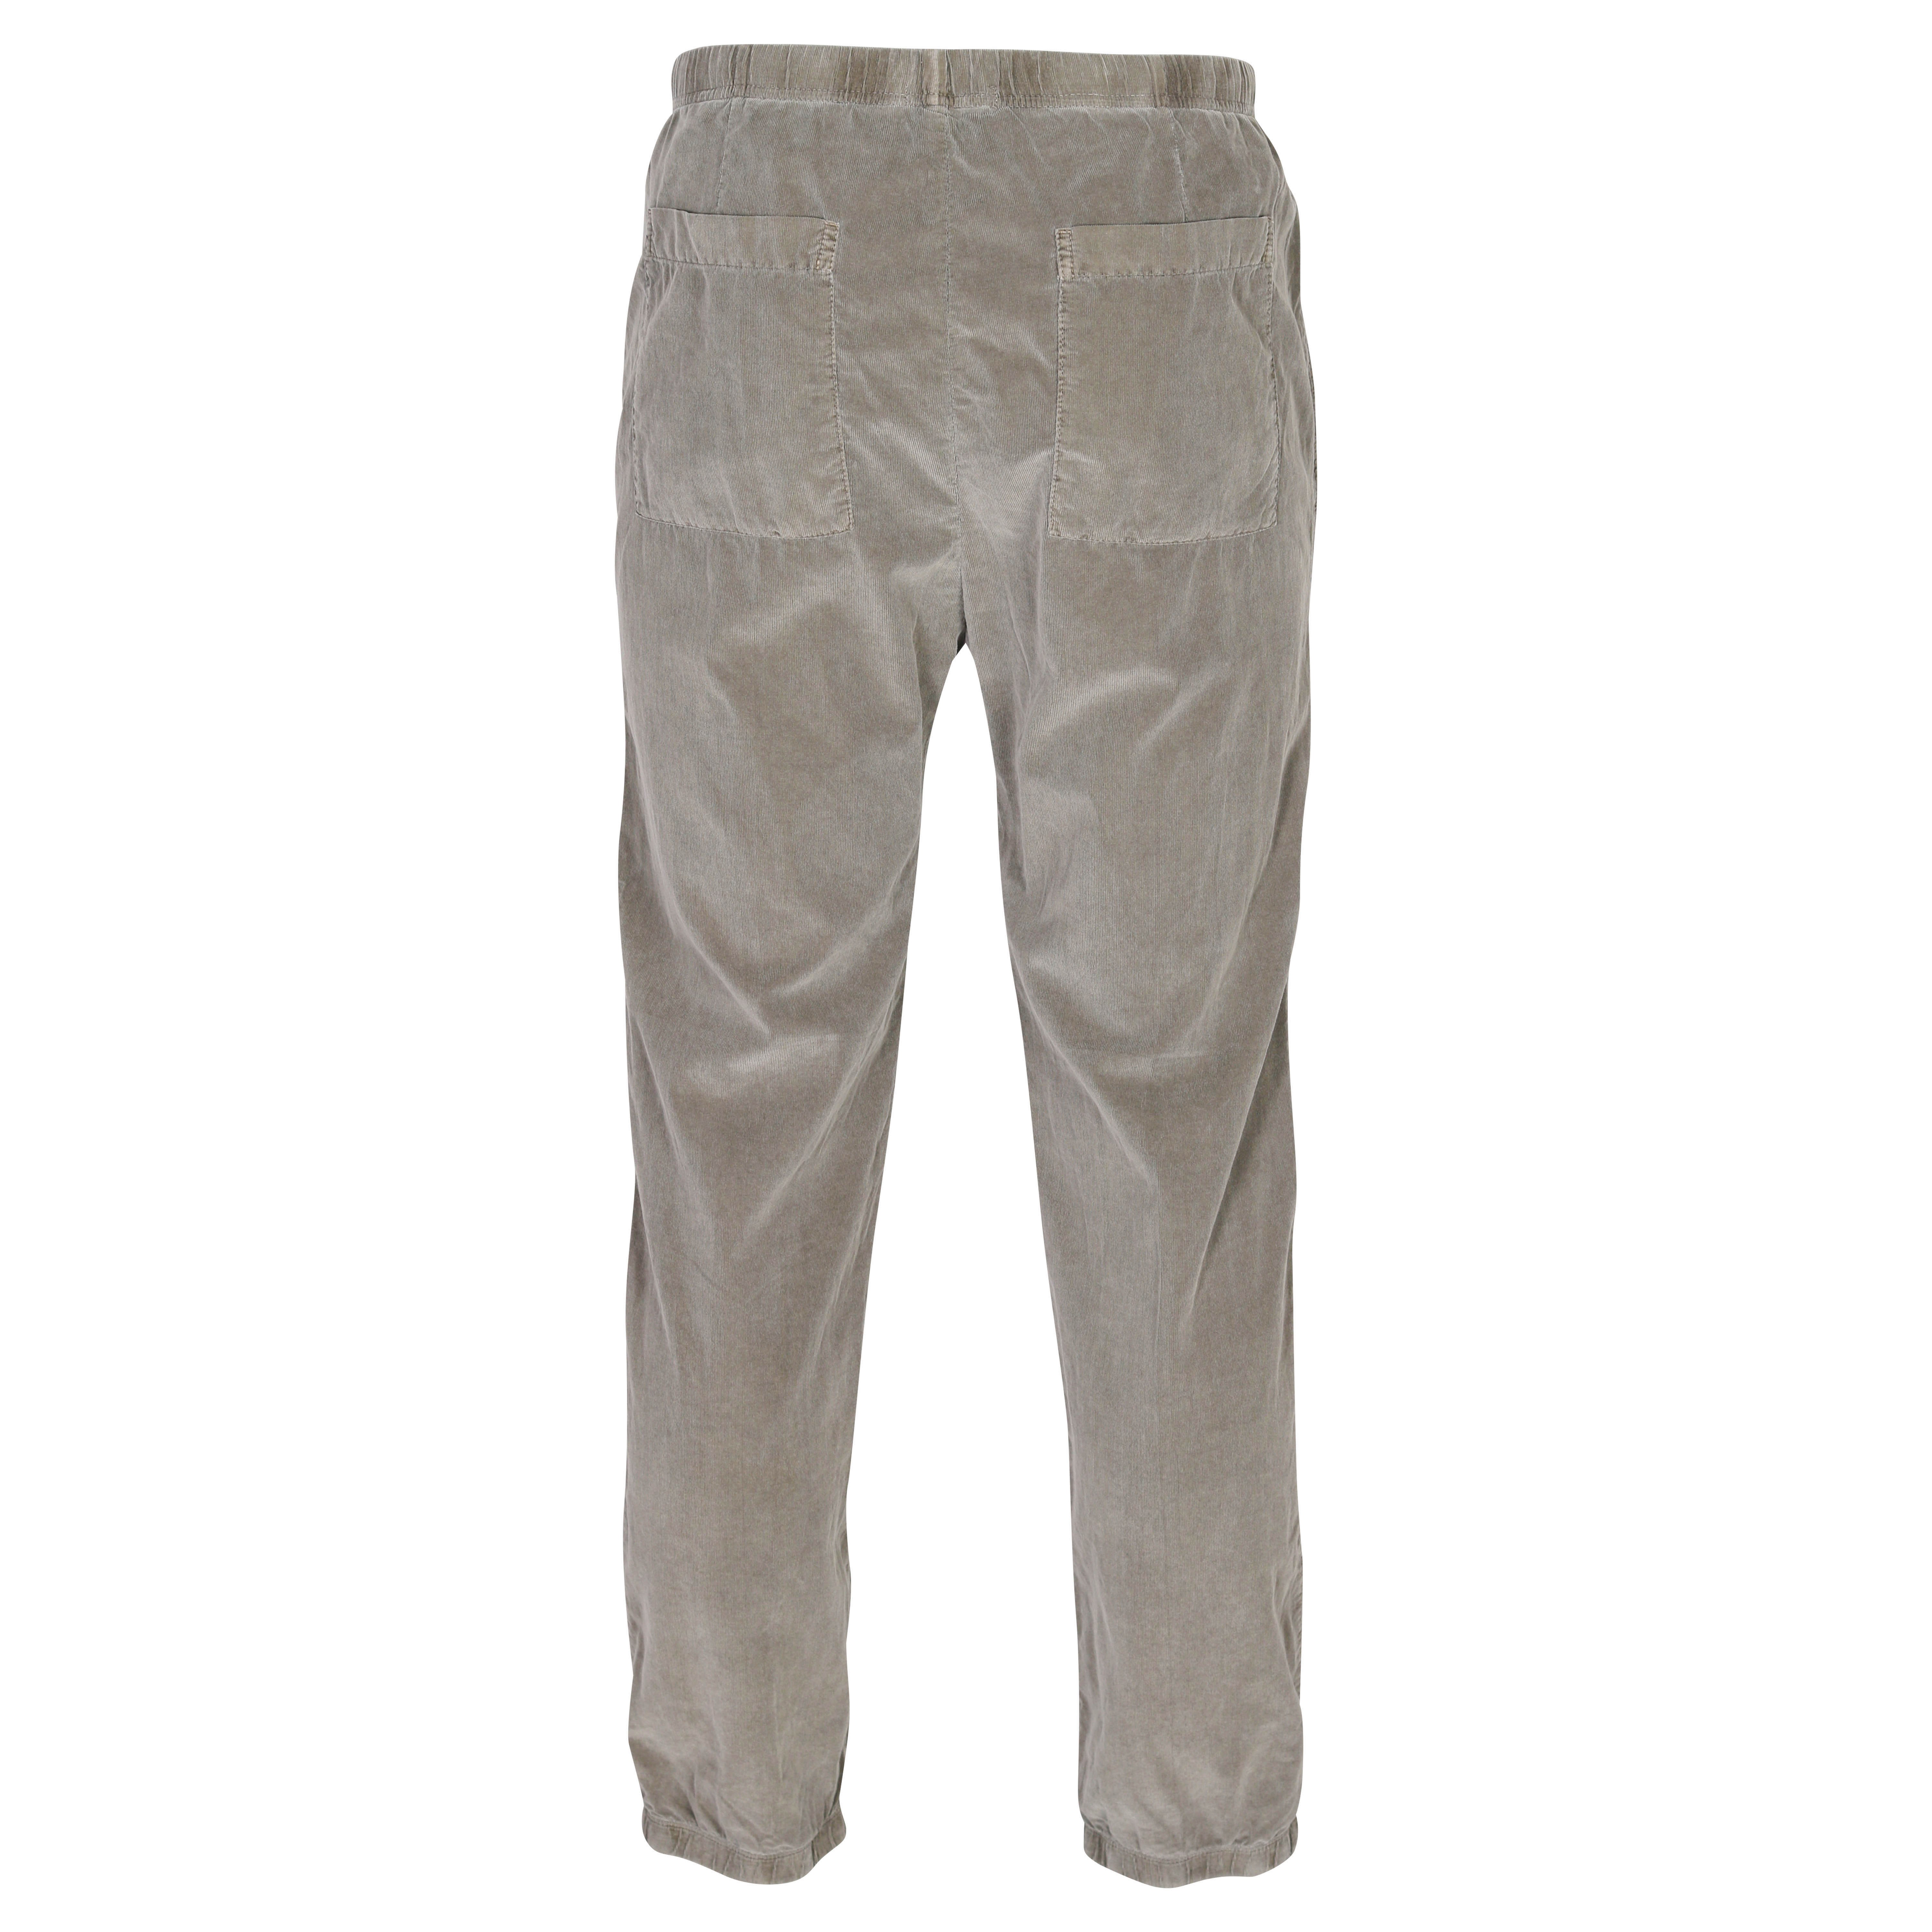 James Perse Ultra Fine Cord Pant in Grey XL/4